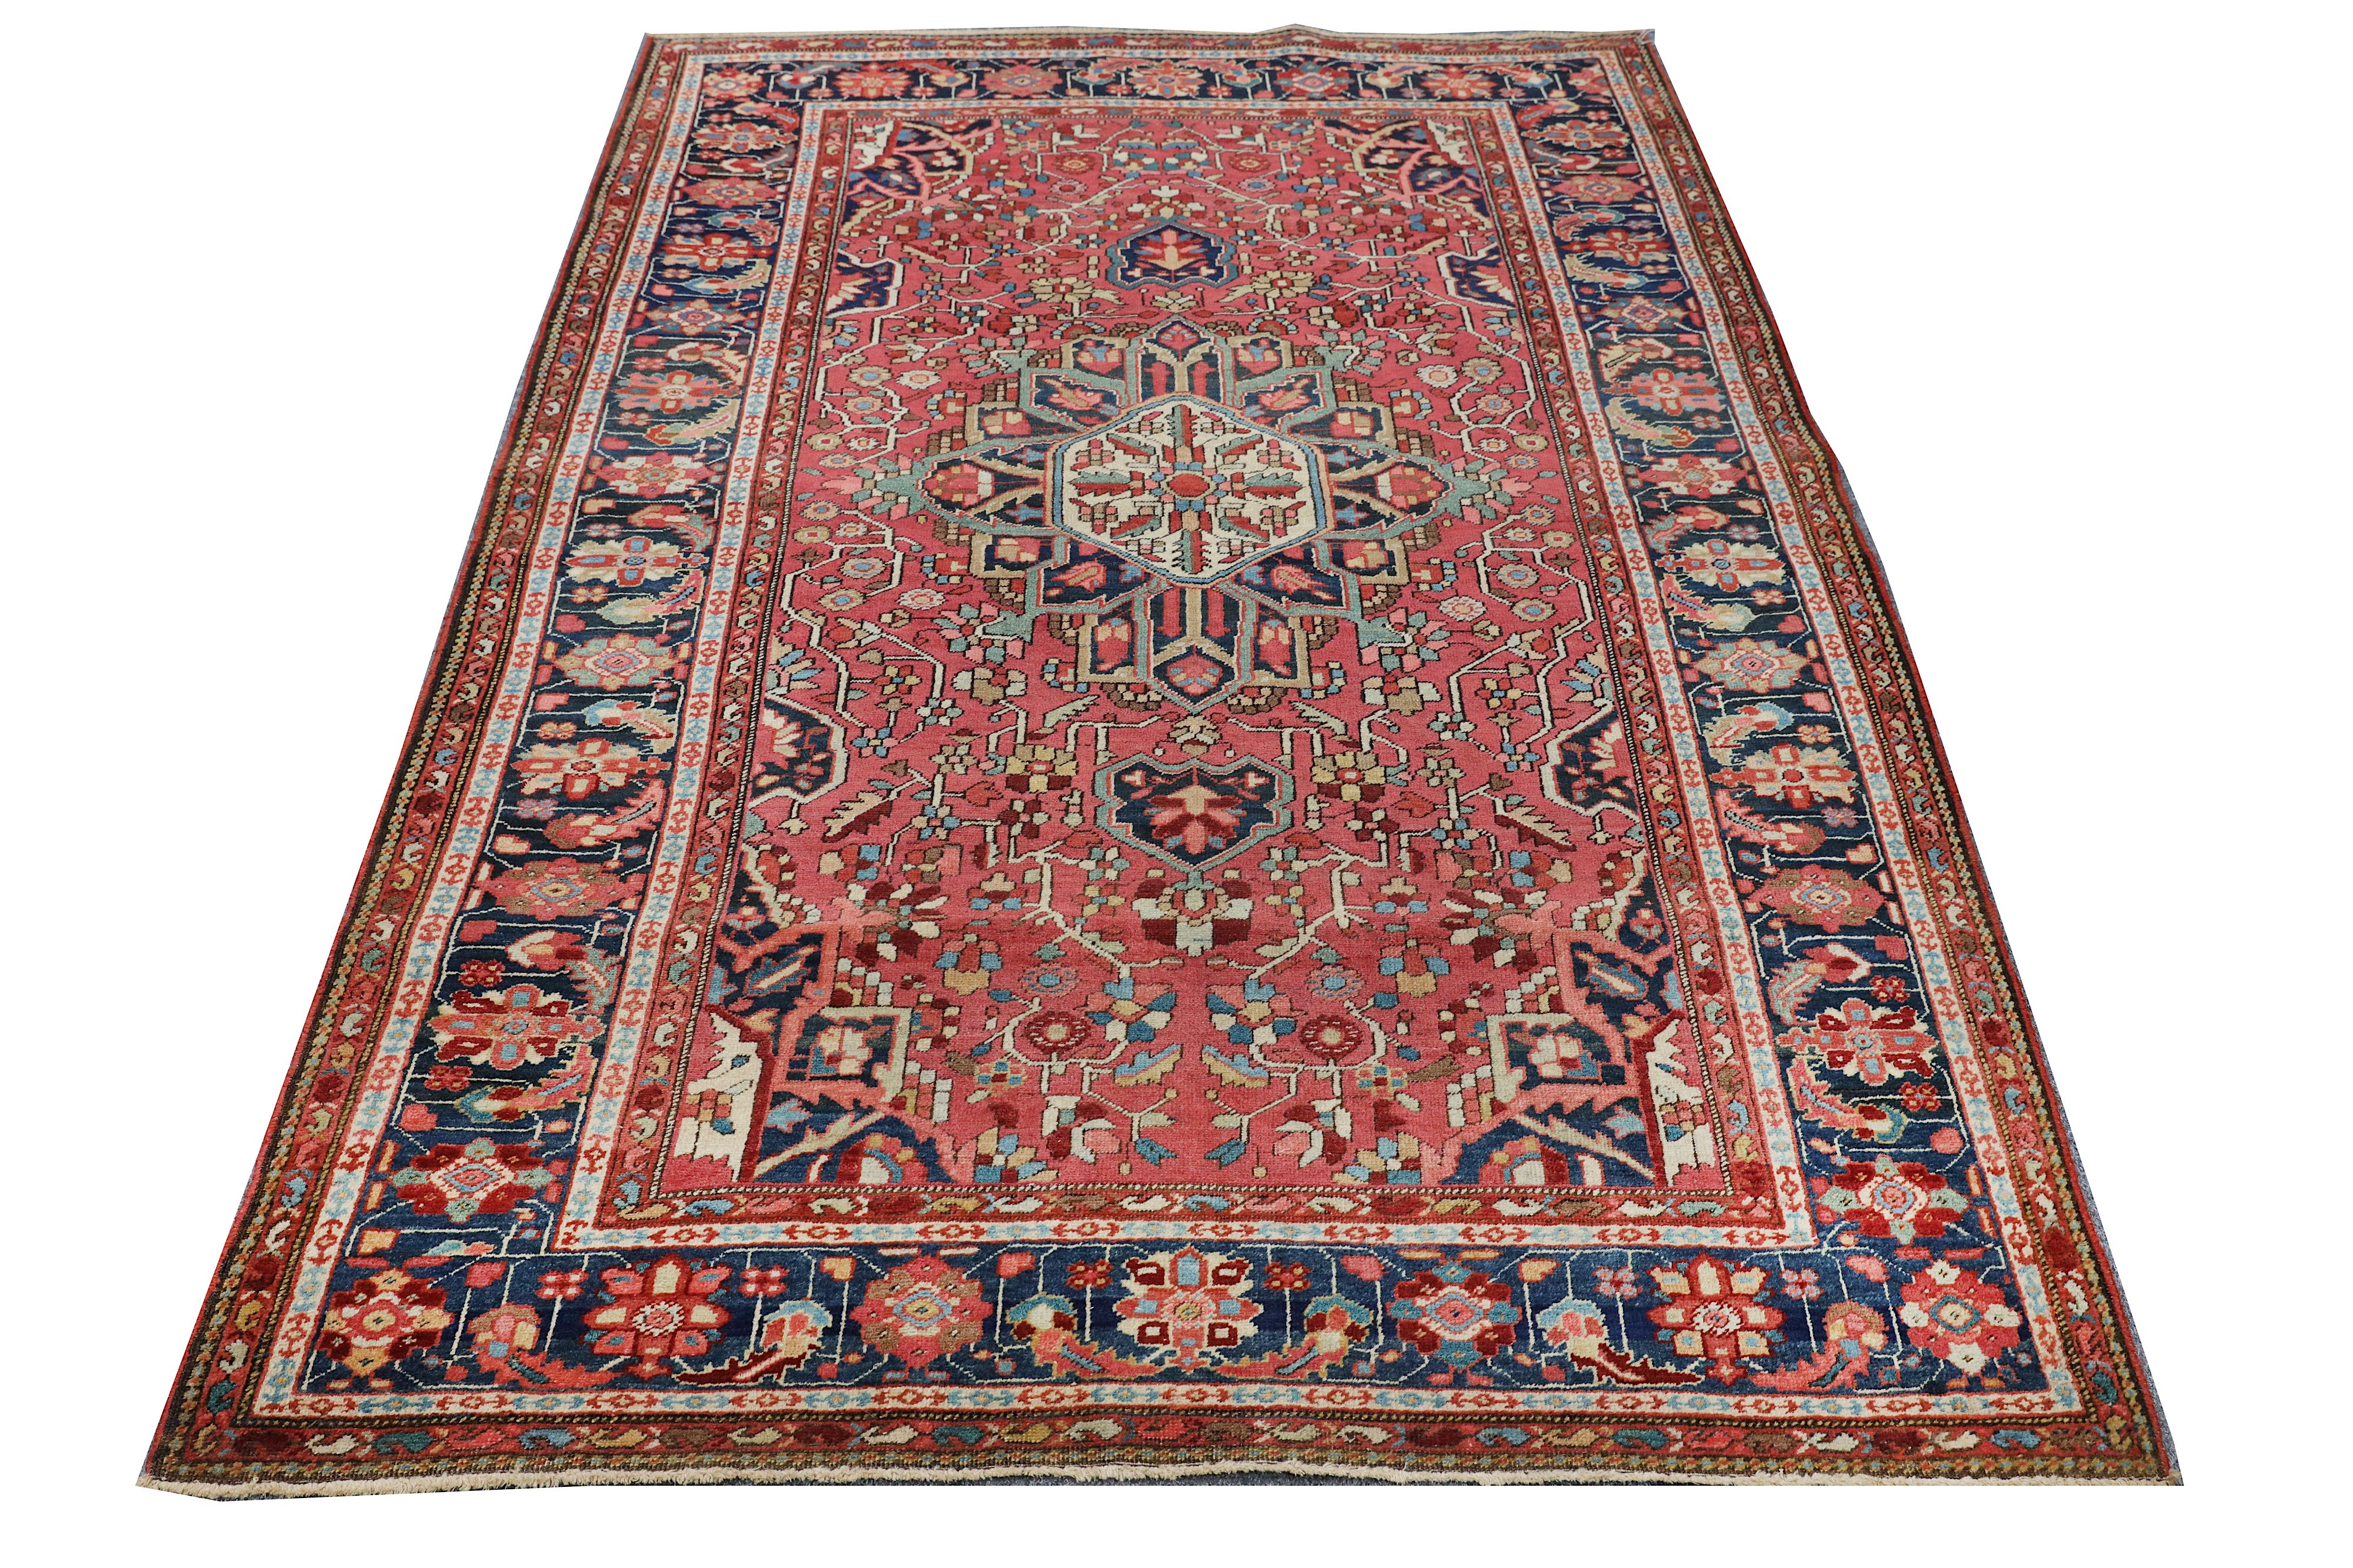 AN ANTIQUE SAROUK-FERAGHAN RUG, WEST PERSIA - Image 6 of 7